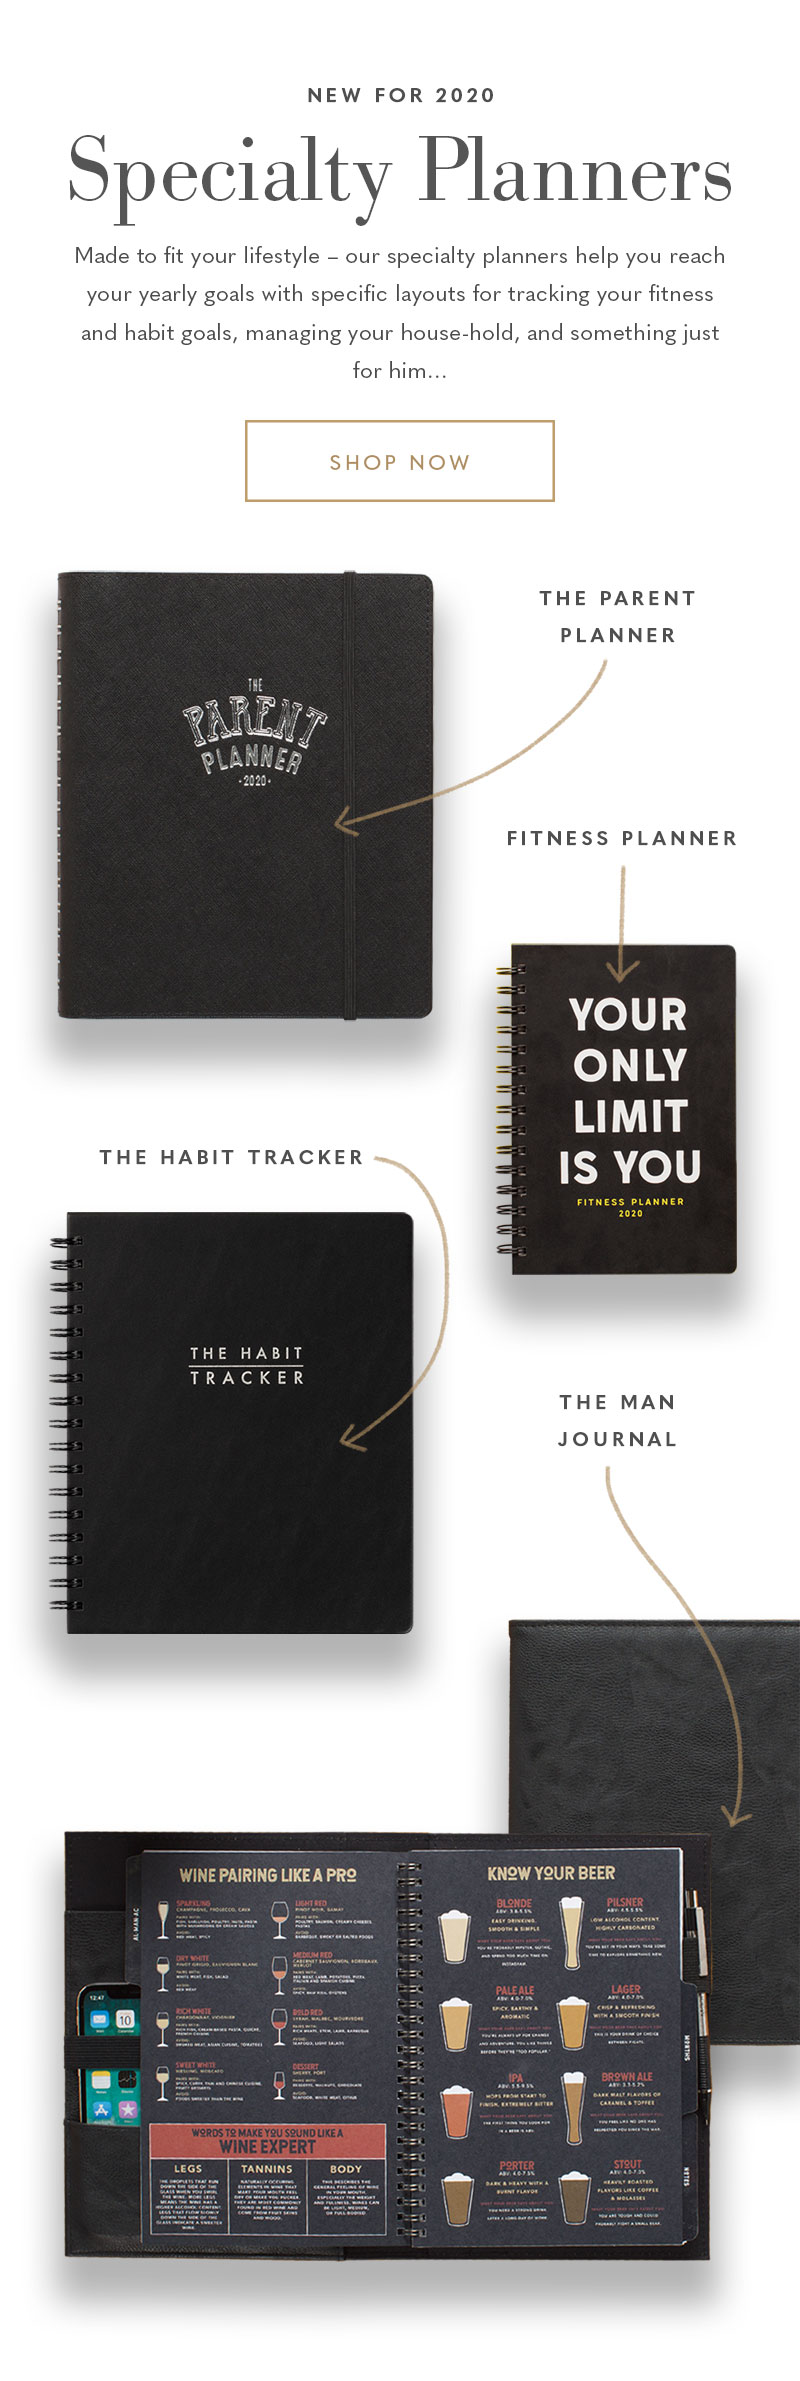 Specialty Planners